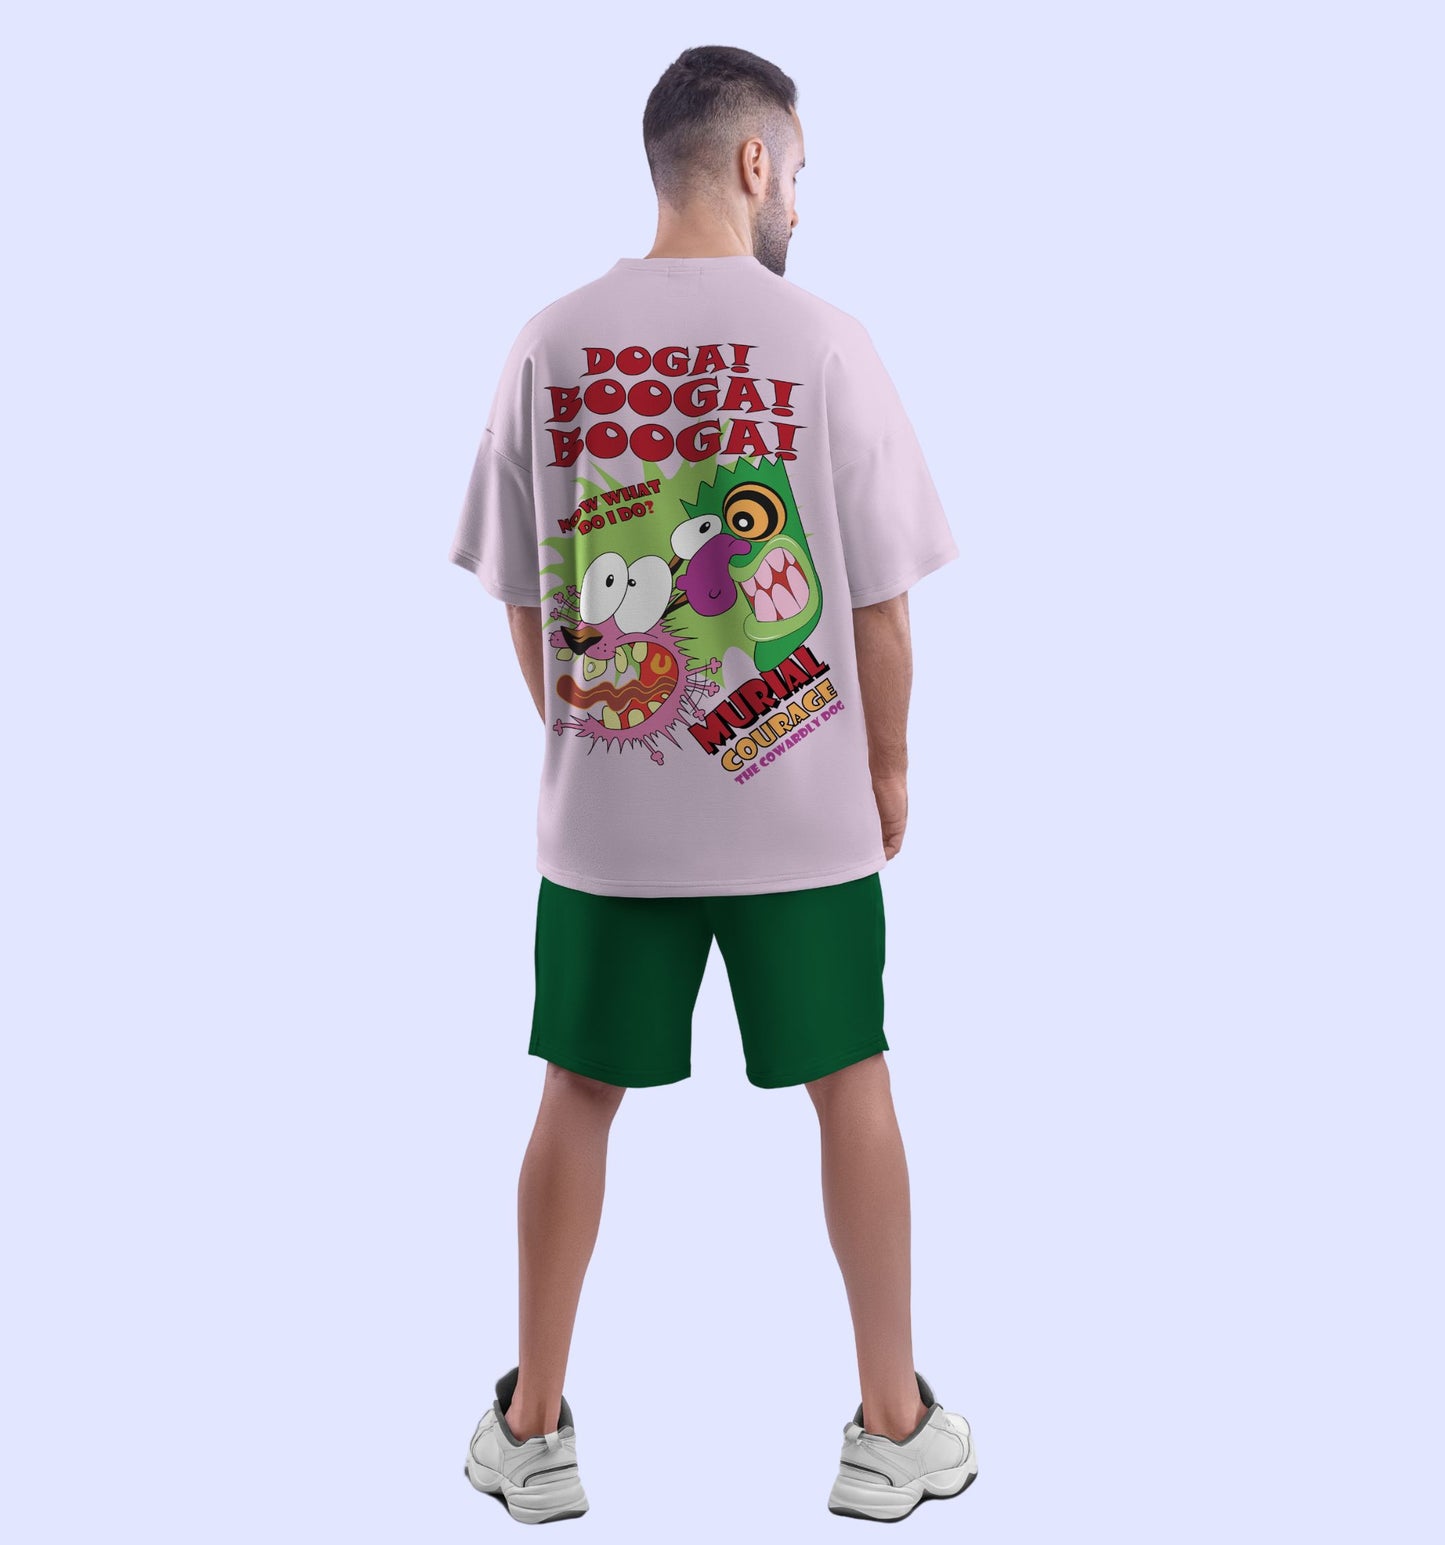 Courage The Cowardly Dog Cartoons And Comics Back print Oversized T-Shirt In Lavender - Mon Zurich Fan Art Printed Collection